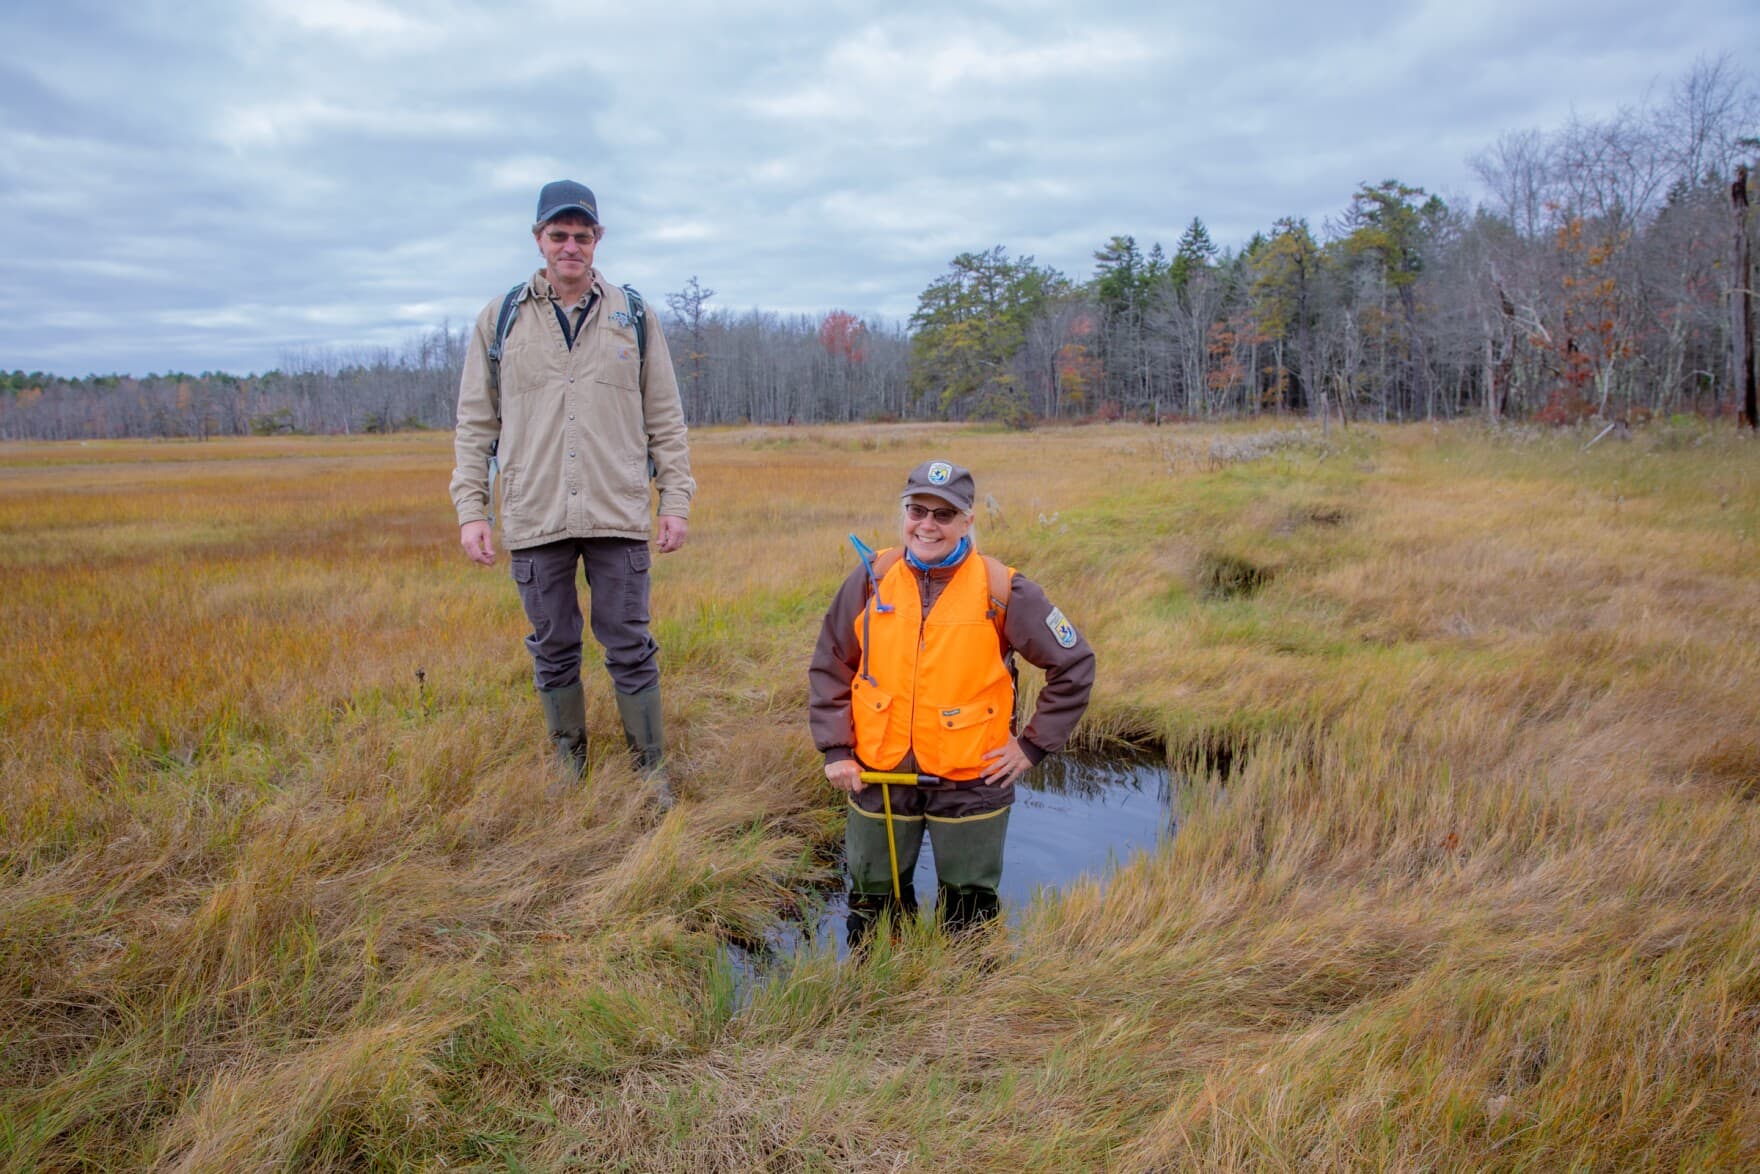 Geoff Wilson stands on an embankment, while Susan Adamowicz stands in a pool, or a 'borrow ditch' that farmers used to borrow soil to make embankments. (Rebecca Conley/Maine Public)